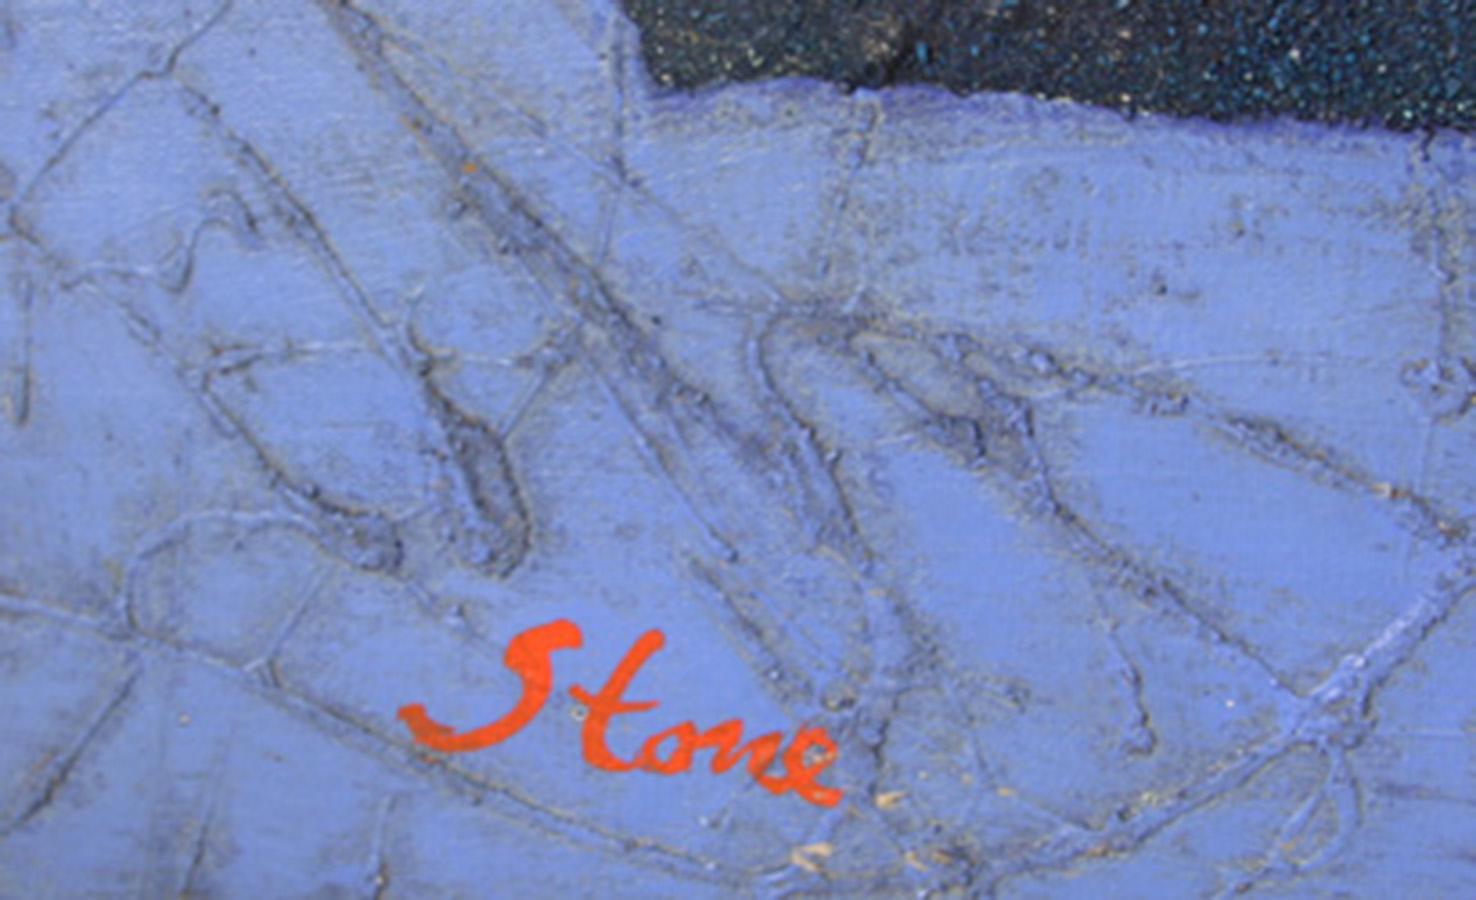 Artist: C. Stone
Title: Accent Marks
Year: circa 1960
Medium: Acrylic and Sand on Canvas, Signed l.l.
Size: 30 x 36 inches (76 x 91.5 cm)